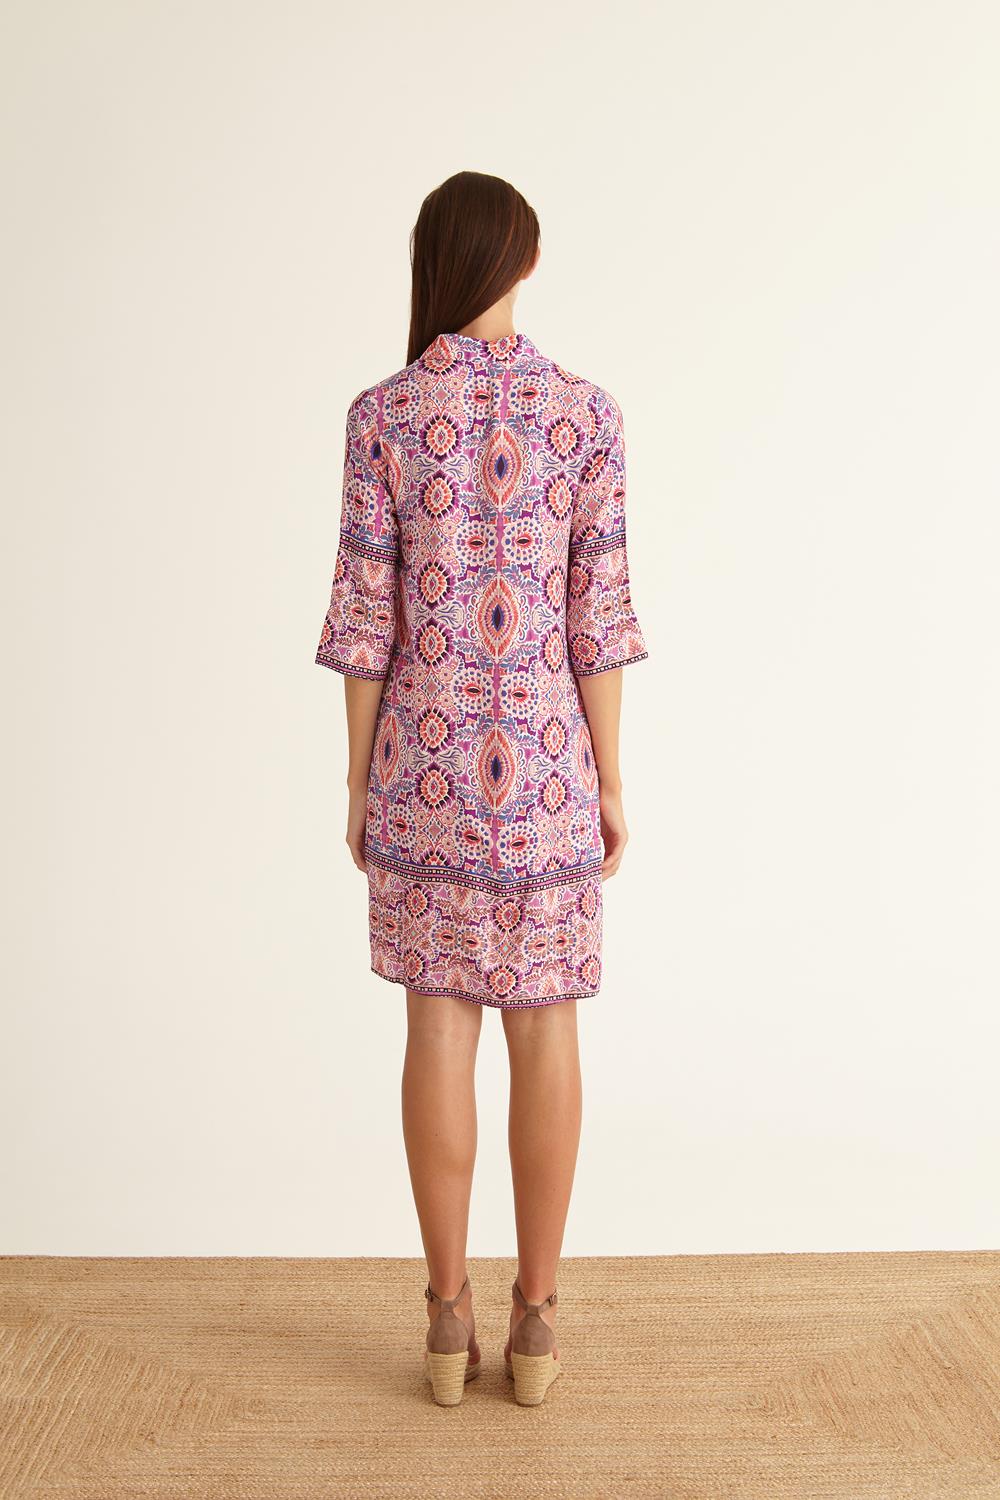 Elbow Length Butterfly Sleeved Dress in Moroccan Tile Print 